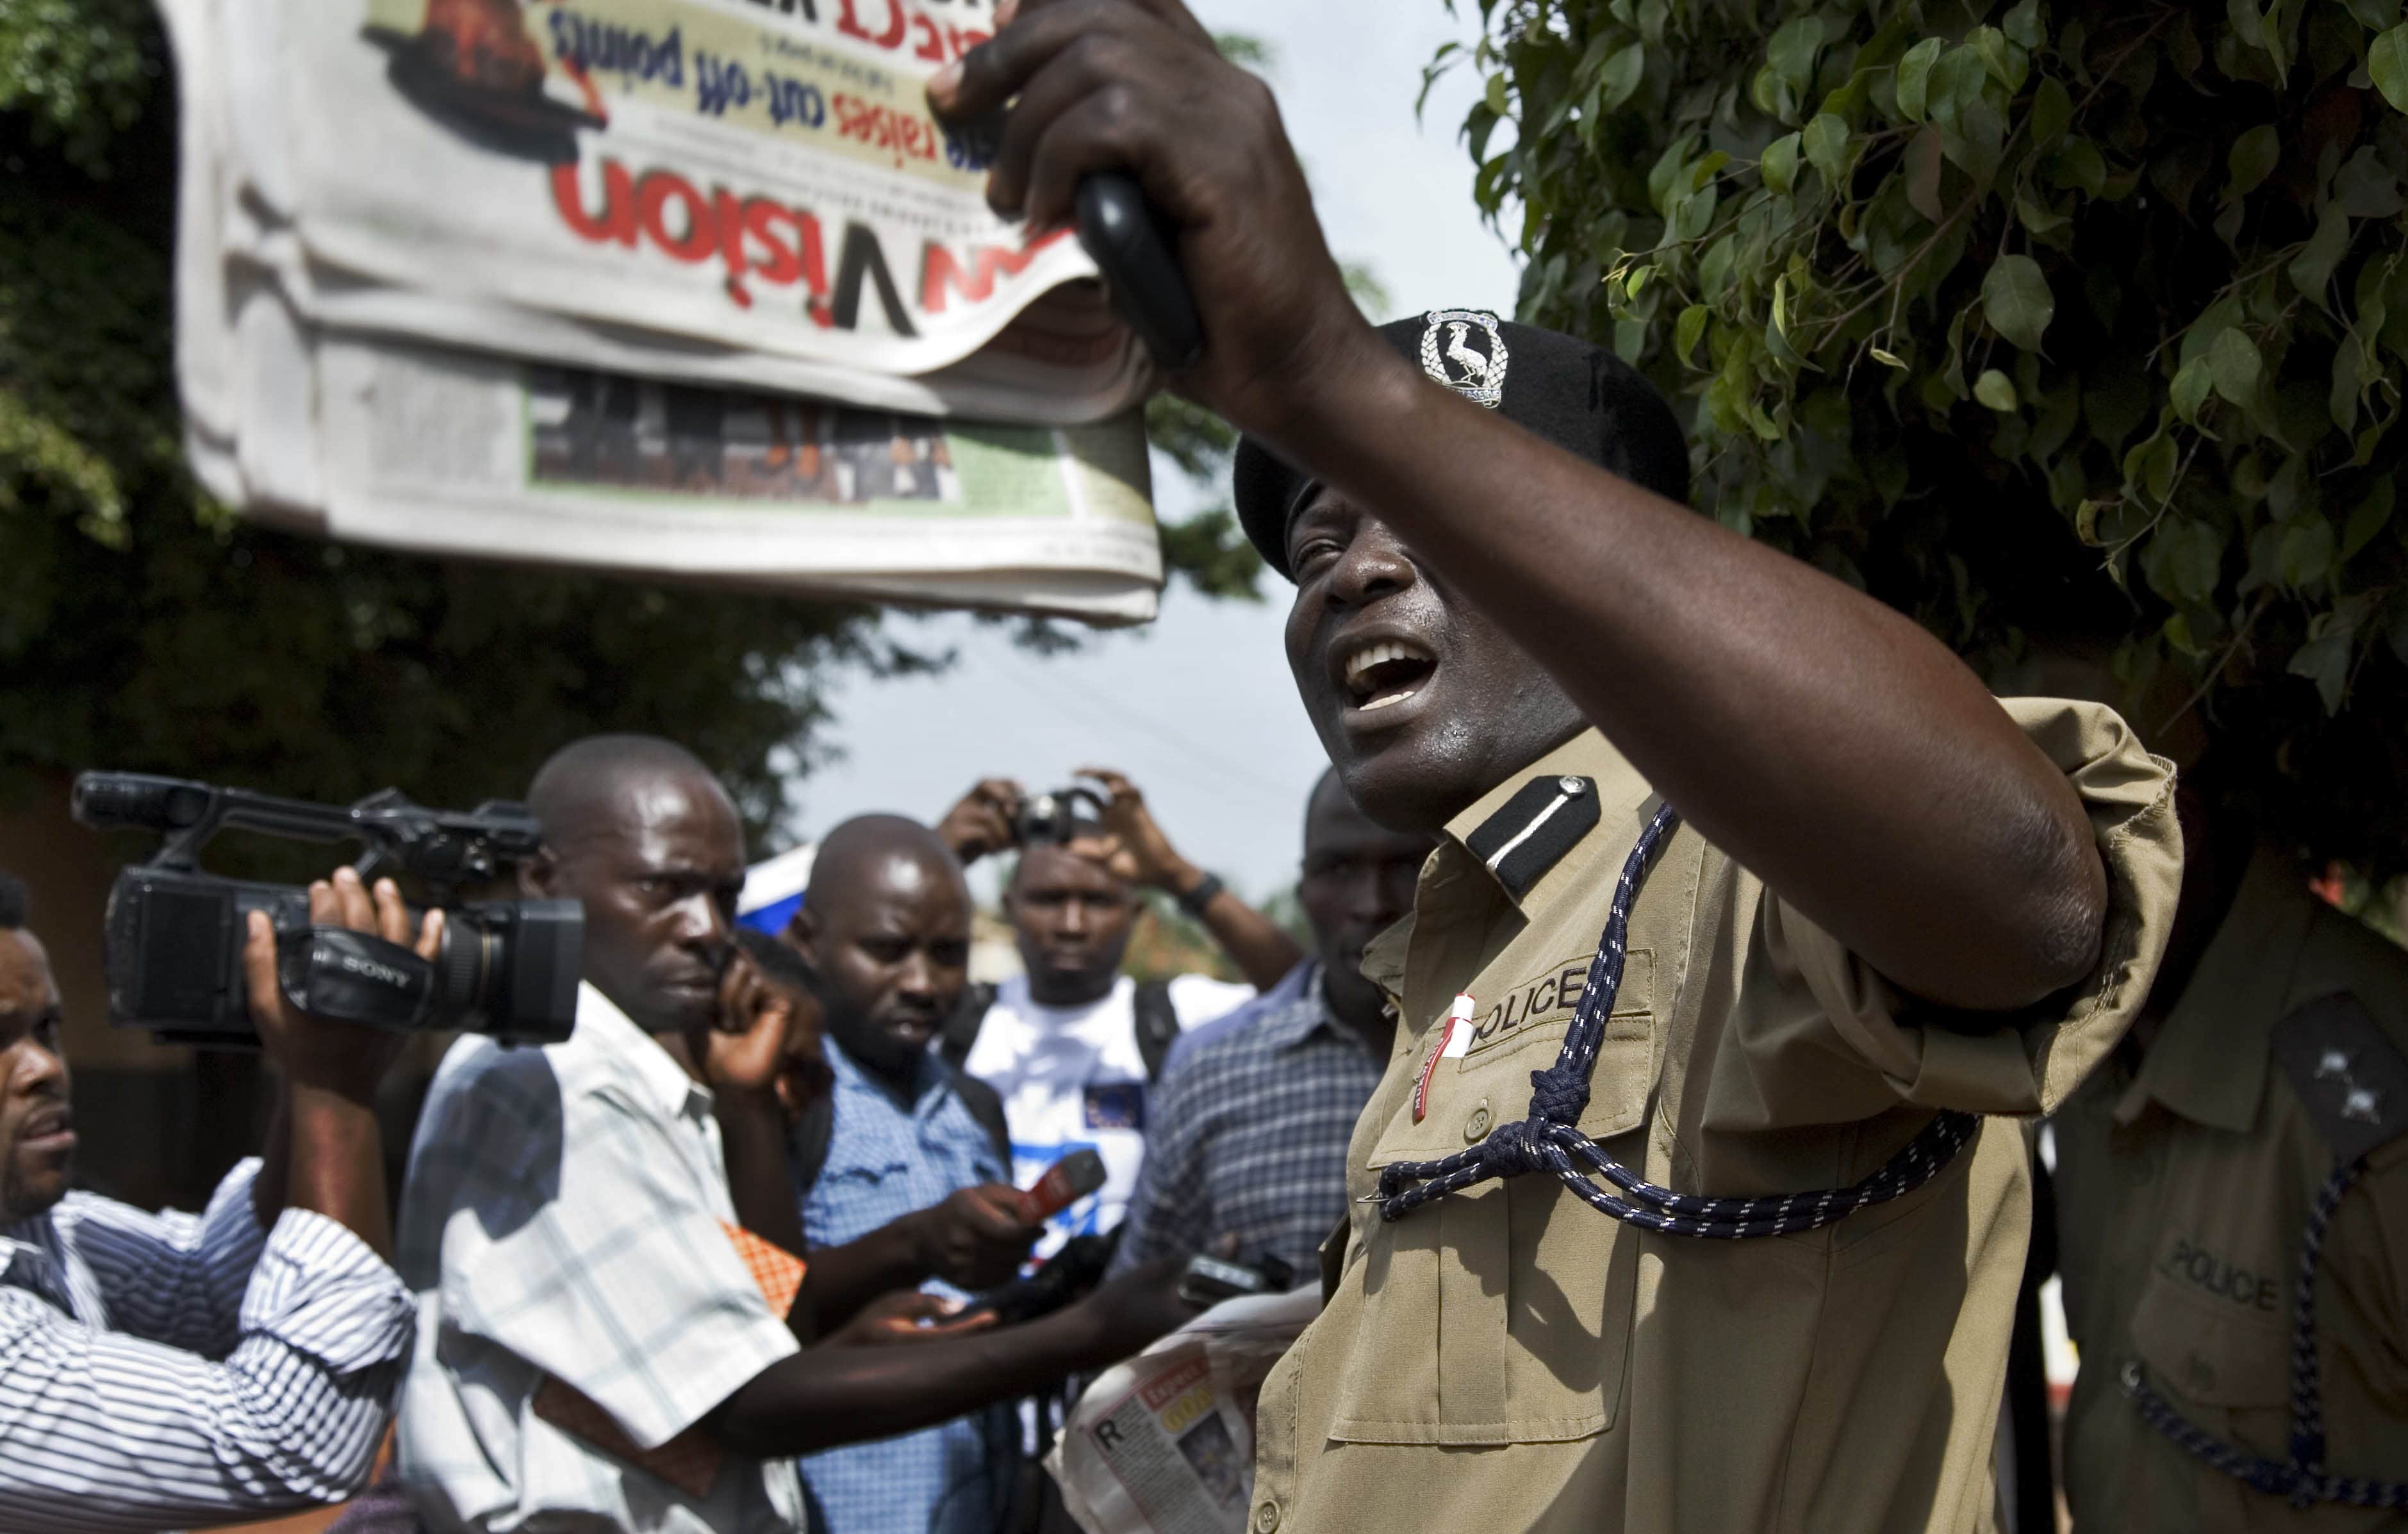 A policeman holds up a newspaper as media and members of HRNJ-Uganda protest outside the Daily Monitor newspaper office, 28 May 2013., AP Photo/Rebecca Vassie, File